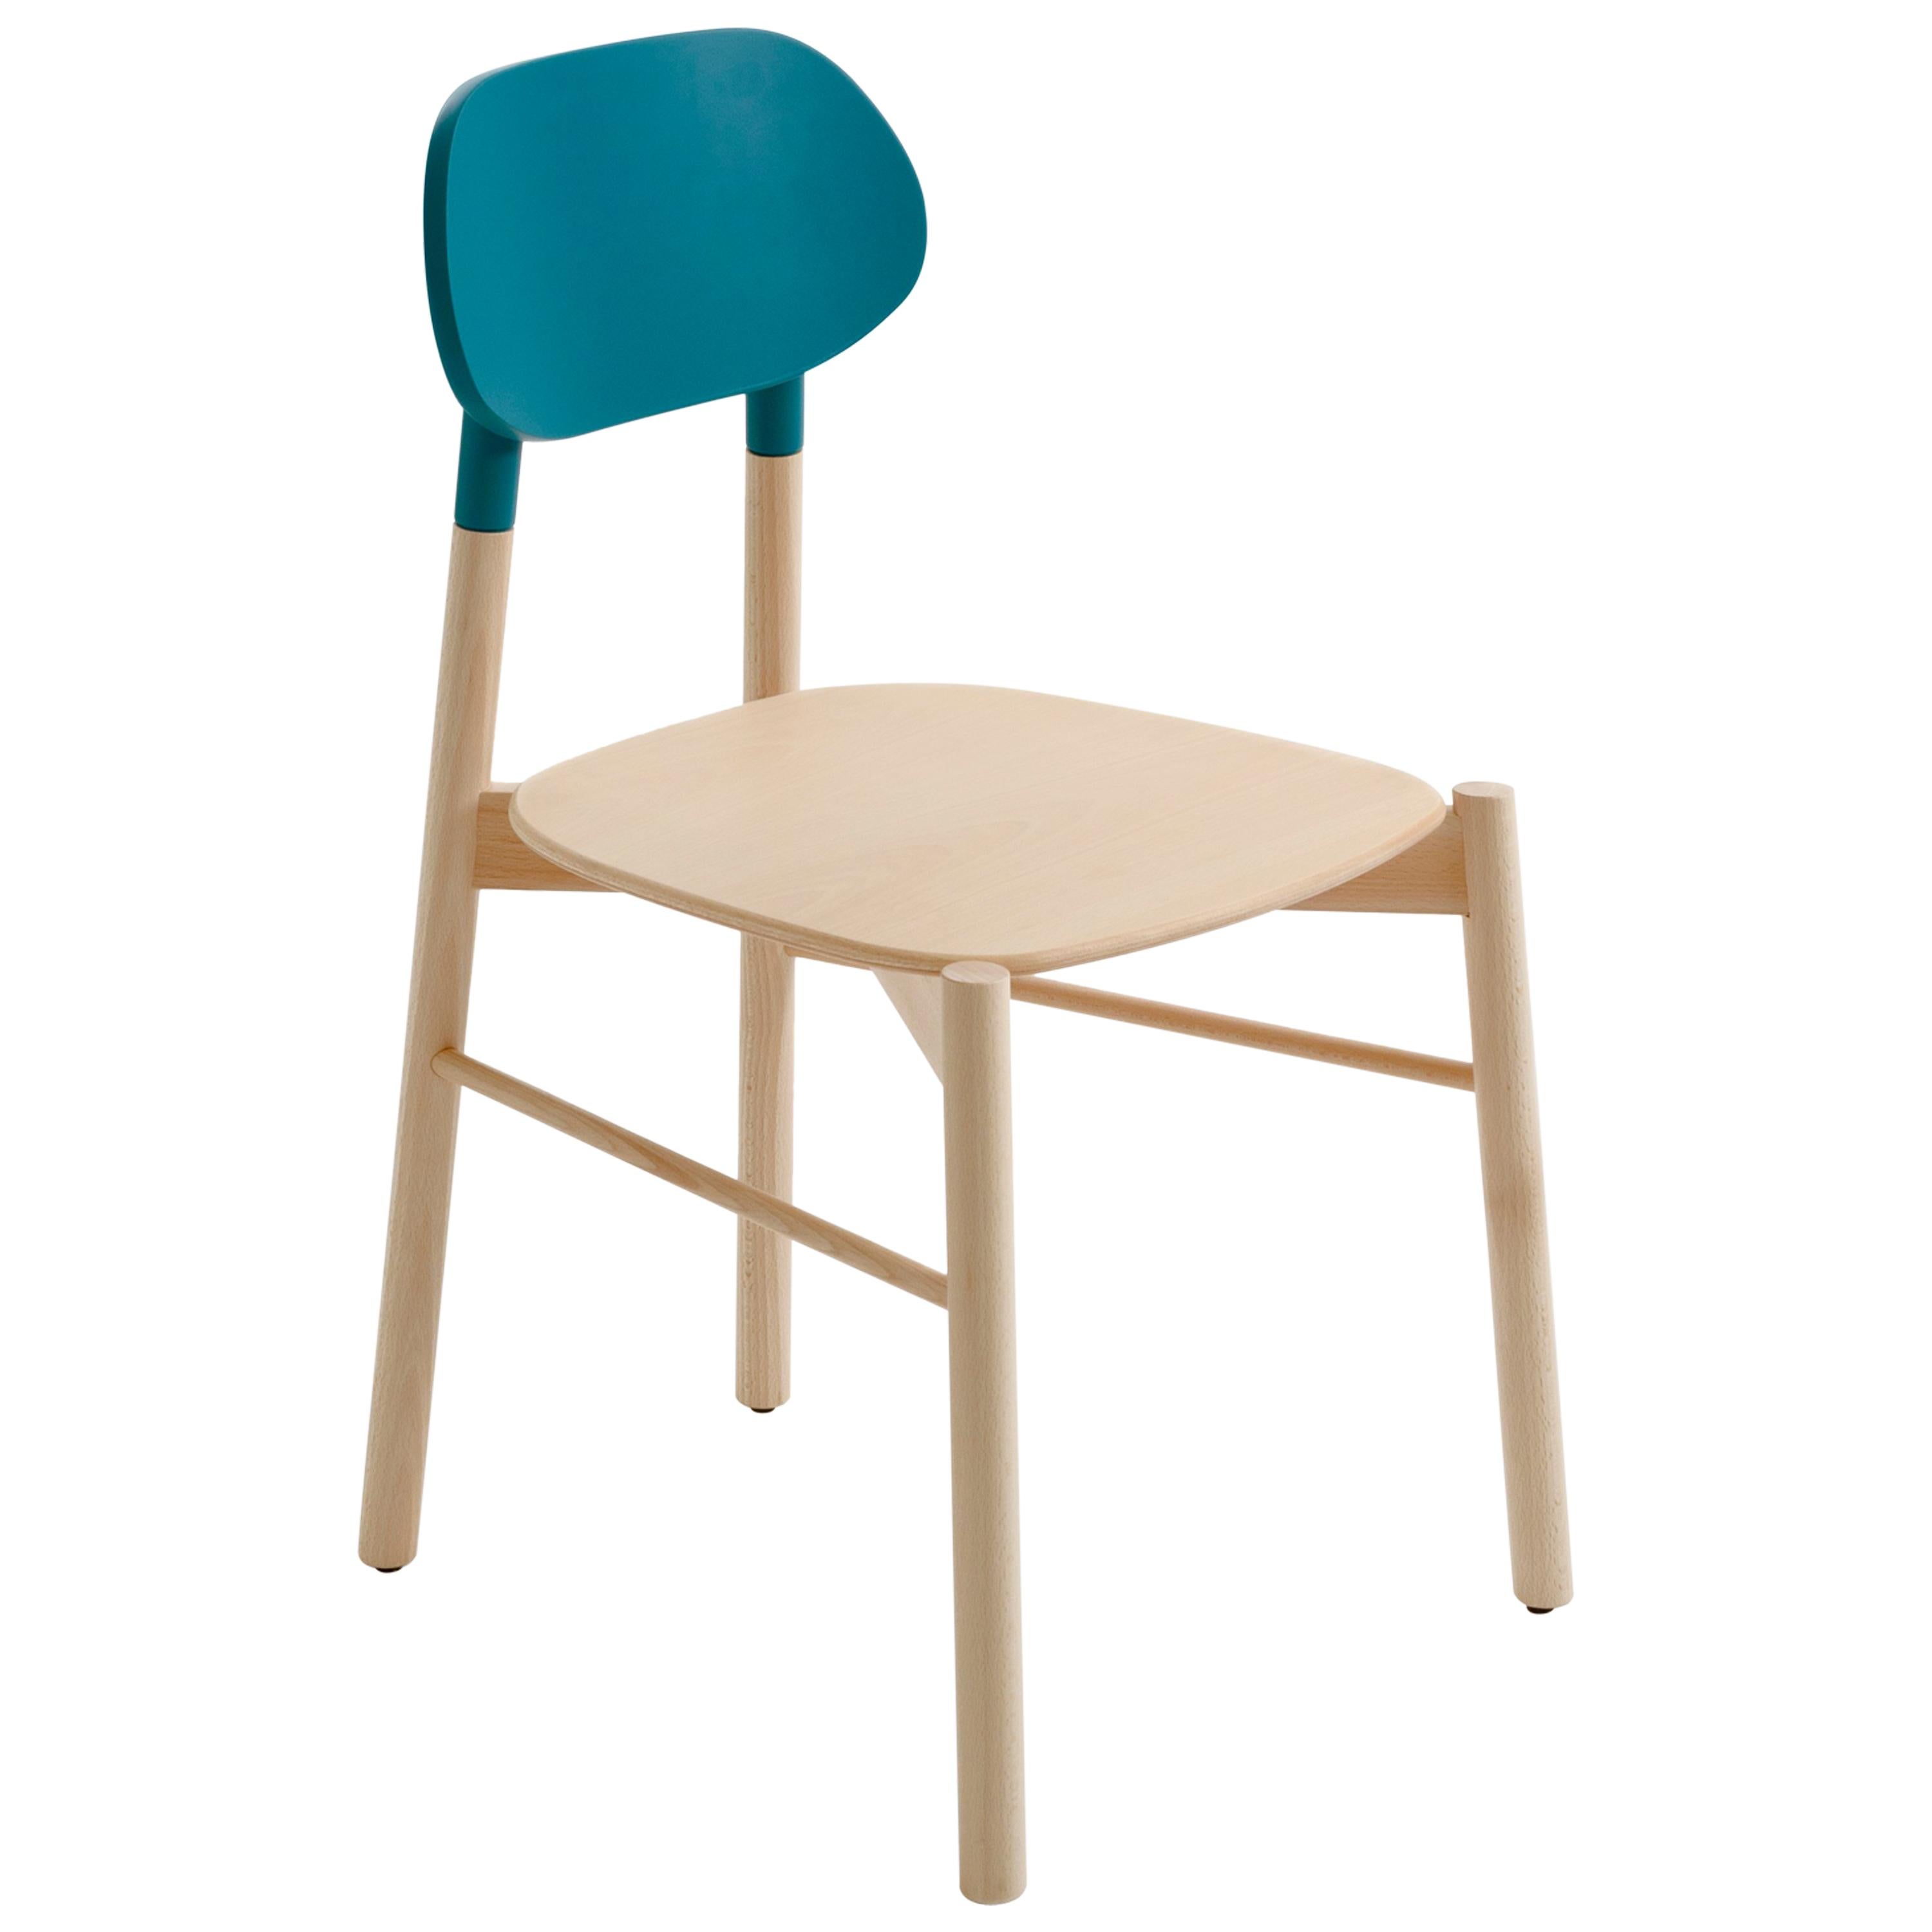 Bokken Chair by Colé, Beech Wood Structure, Turquoise Back, Minimalist Design